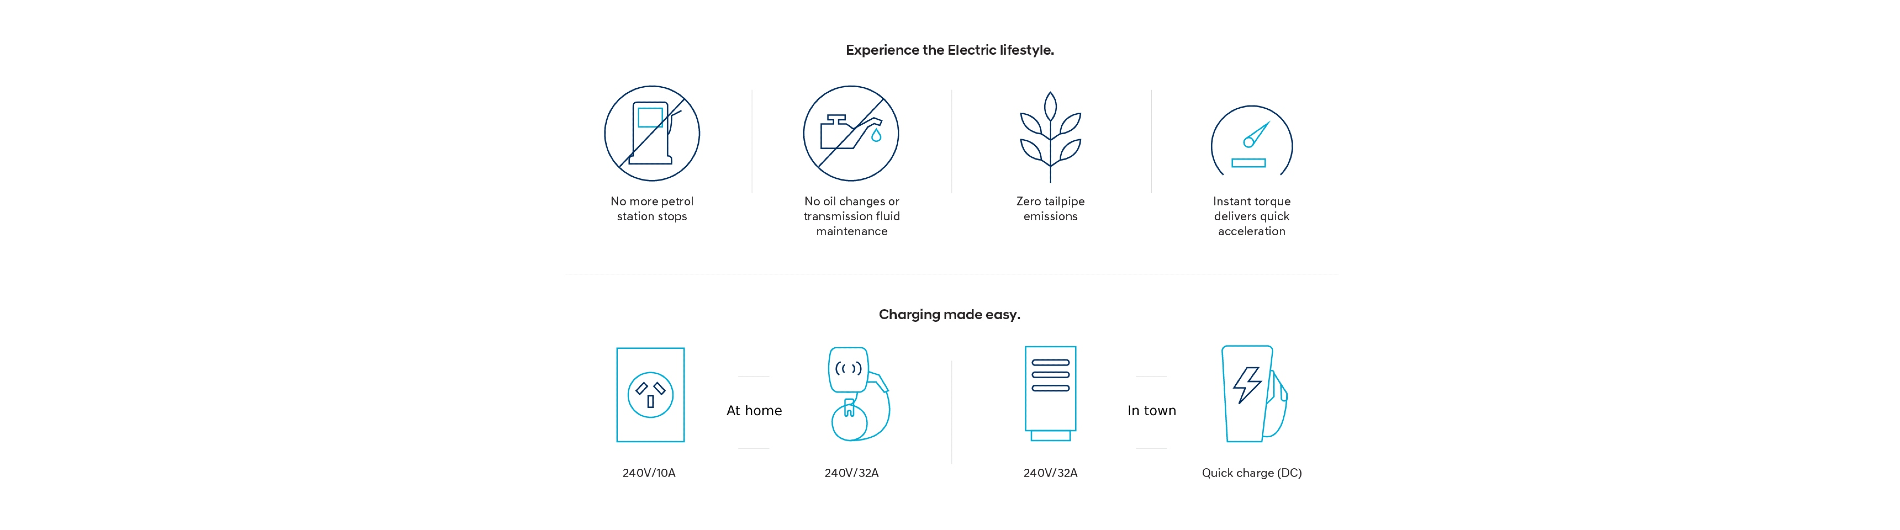 Electric_infographic_1900x530.png